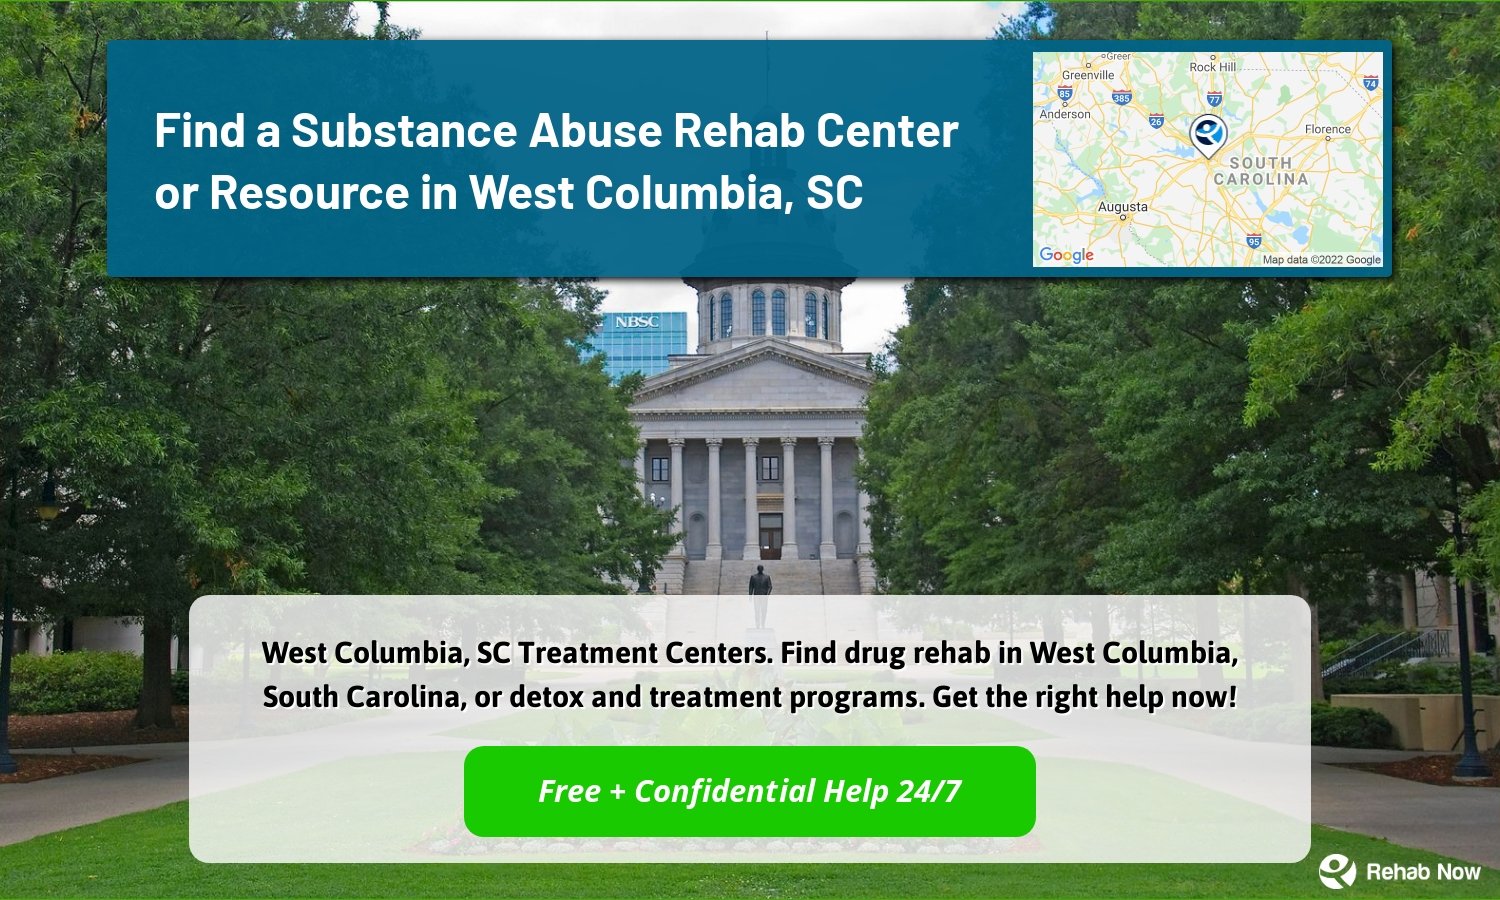 West Columbia, SC Treatment Centers. Find drug rehab in West Columbia, South Carolina, or detox and treatment programs. Get the right help now!